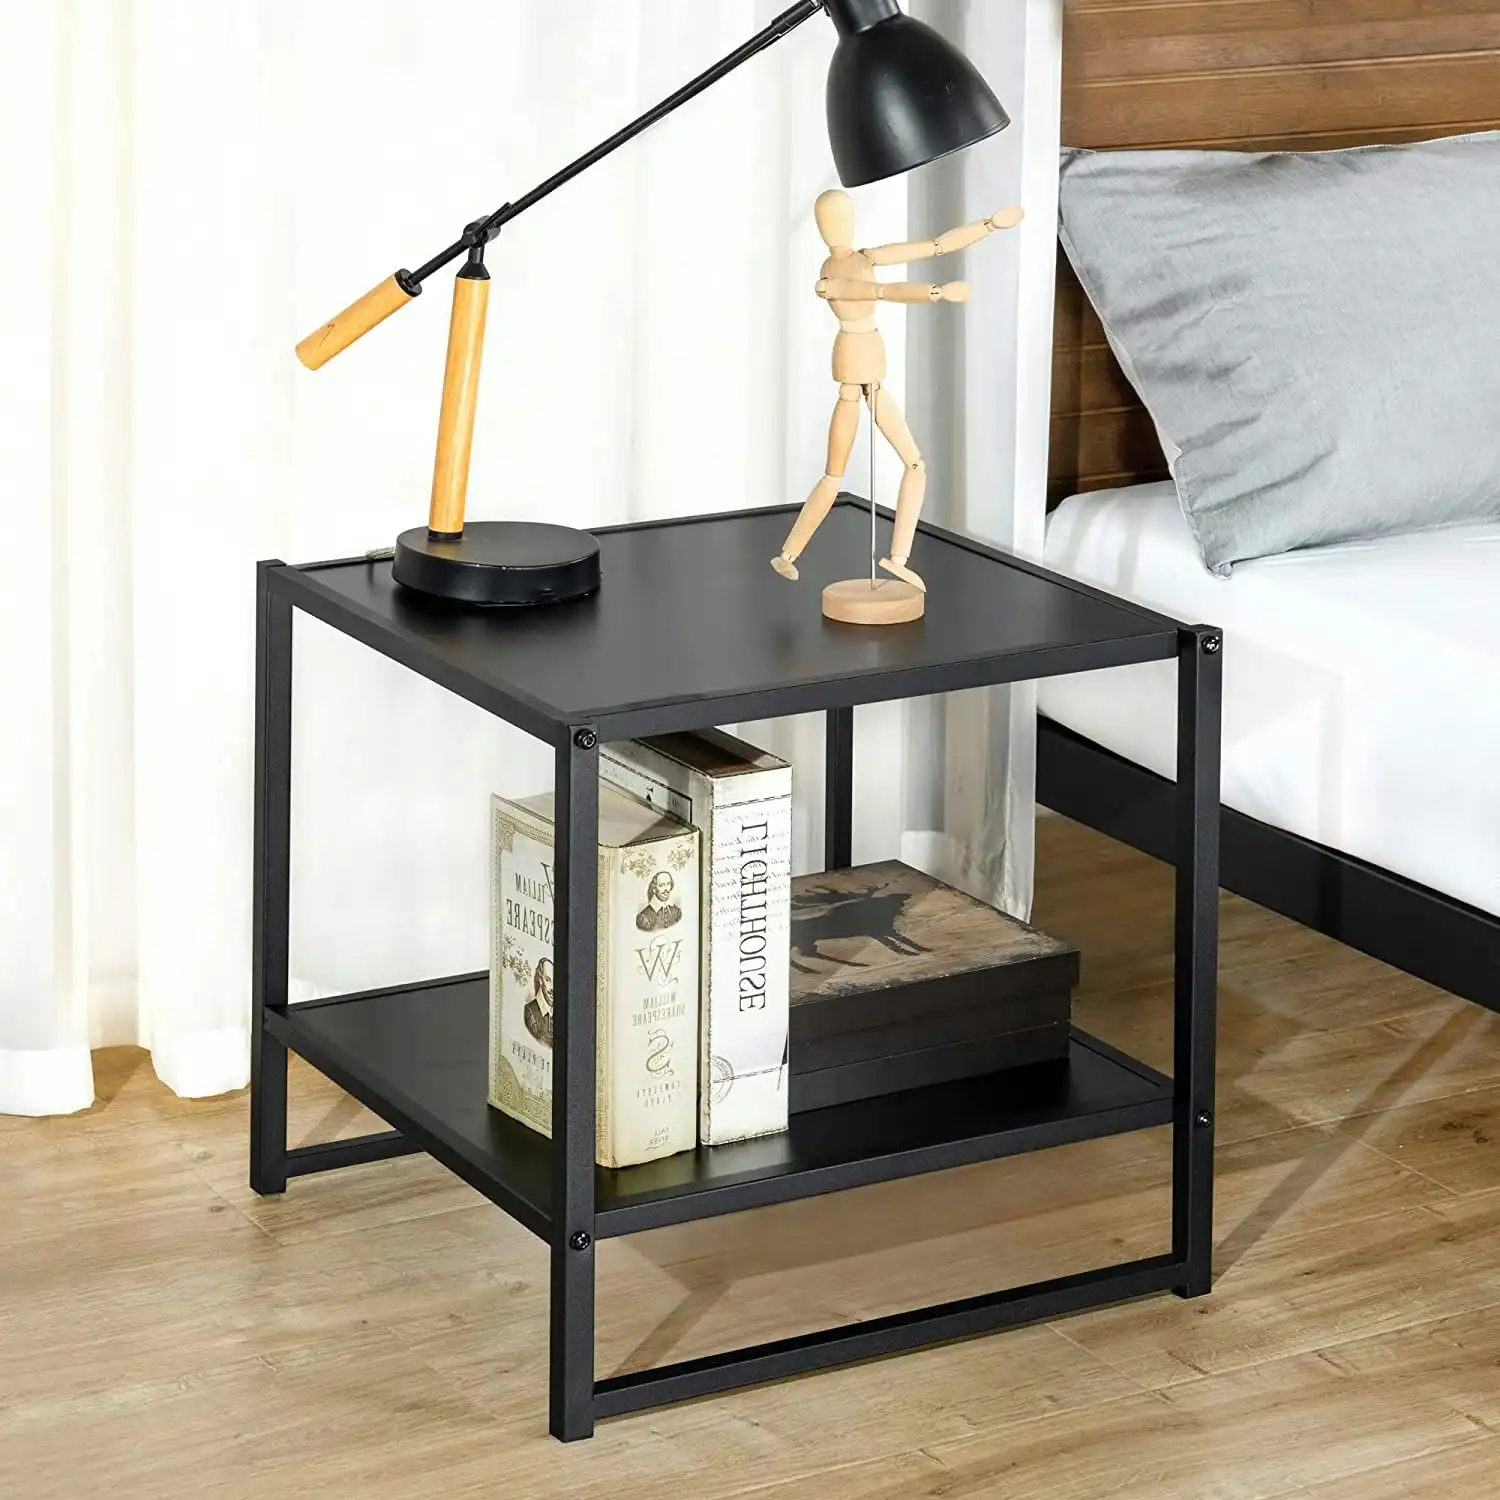 Set of Two Small Bedside Table (Black)